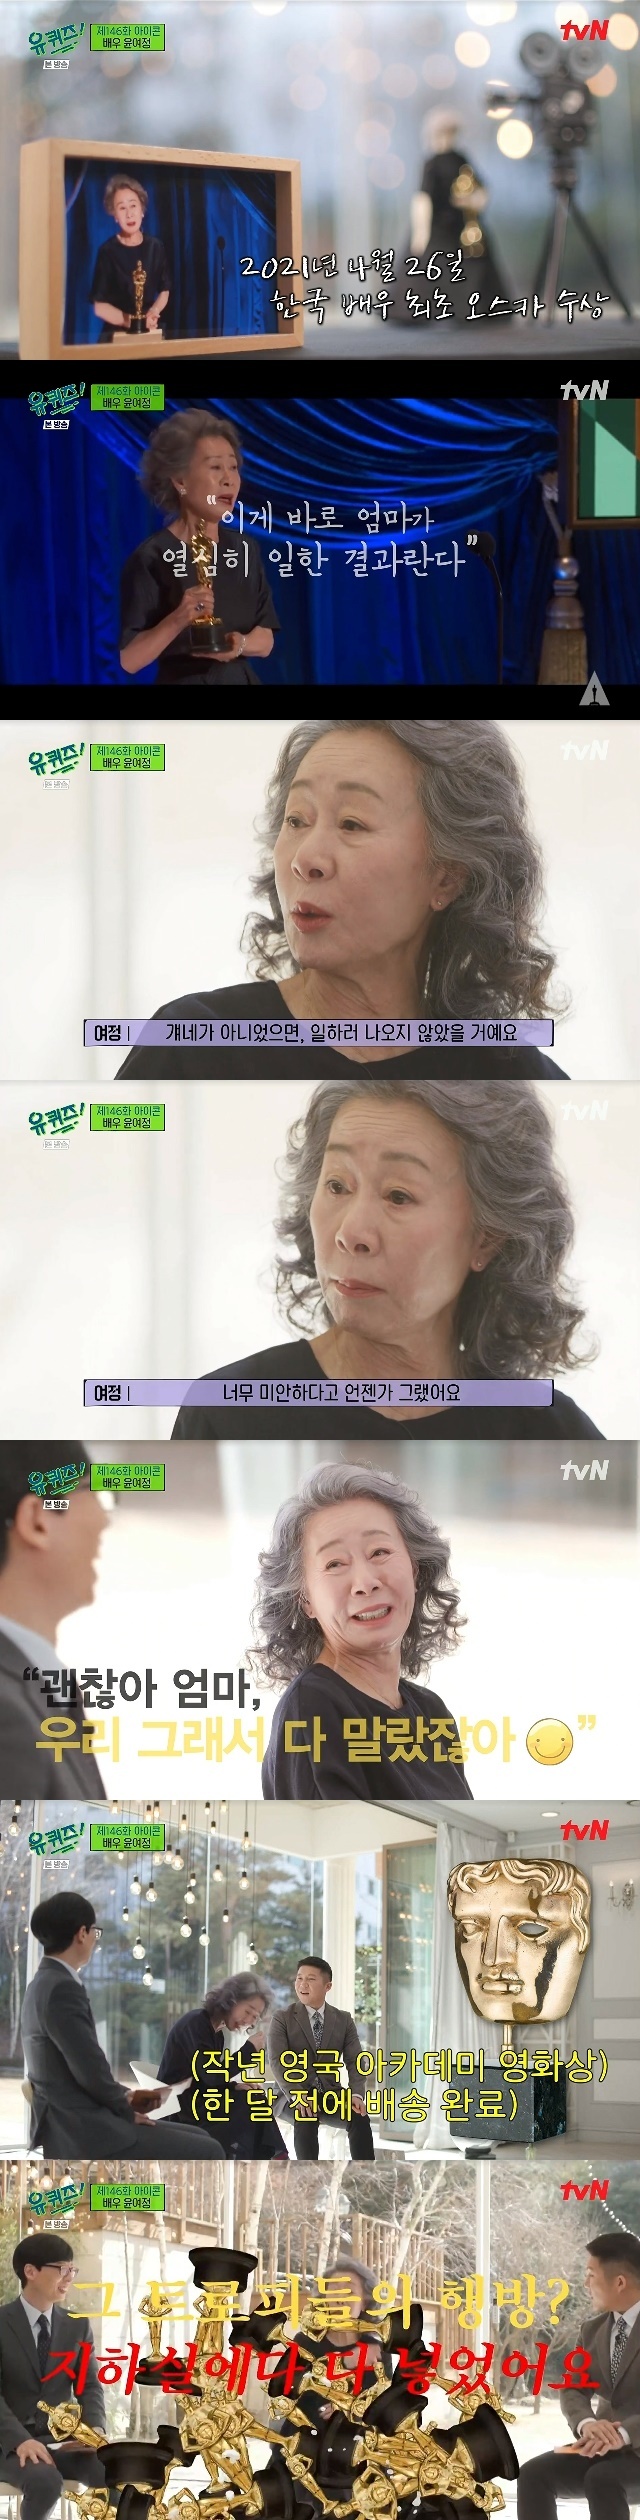 Youn Yuh-jung captivated everyones ears with a cool and honest gesture.In the 146th episode of tvN You Quiz on the Block (hereinafter referred to as You Quiz on the Block), which was broadcast on March 23, actress Youn Yuh-jung, who received world recognition for acting ability, appeared as a guest.There were various reasons for calling Youn Yuh-jung an icon today.Winning best supporting actress awards in acting, trendiness, unique wit and British Academy, All awards are meaningful but this prize feels even more special.The British people who pretend to be good have recognized me as a good actor. Yoo Jae-Suk asked about the recent situation, saying that A Year Ago in Winter was Youn Yuh-jung syndrome.Youn Yuh-jung said, I shot a movie. I was so sorry that I had to lie on the street at minus 10 degrees. Its okay, I was so strong.I saw Gang Dong-Won for a while yesterday, and he said I was too hard, and he took a god that was at minus 10 degrees.My head was frozen and melted. You said you won. Whats that say? He shot more than I did.Yoo Jae-Suk noted that he met Gang Dong-Won, who is difficult to meet normally at the end of this statement, just yesterday.Then Youn Yuh-jung gave a loud laugh with his distinctive cool tone, You go there to shoot, its raining and youre on the road.Youn Yuh-jung appeared on You Quiz on the Block to promote the Apple original series drama Pachinko.Youn Yuh-jung emphasized that he wanted to play a role in his role in the Pachinko, which depicts the life of Koreans in Japan.Youn Yuh-jung said, These people (Apple side) asked me to see Audition, and all Korean actors said I should see Audition.Strange things are often twisted.I know you have to watch Audition as a rule, but you can say that I am not suitable for the role, but I am a woman who has seen Audition in Korea and fell off.I can not ruin my career for fifty years because of Apple. The more I do not have it, the more I have pride. I can not see Audition.Youn Yuh-jungs latest work, Pachinko, which joined the work, was a masterpiece with about 100 billion won.Youn Yuh-jung just laughed at this story, saying, I do not care about other peoples money, and I am interested in how much I pay.Yoo Jae-Suk commented on A Year Ago in Winter Youn Yuh-jungs Academia Award.Youn Yuh-jung said Yoo Jae-Suk didnt believe it while watching TV and said, I didnt believe it either, and I ruminated it to me, it was an accident.I really wanted Clean Close to get it, and she became No. 7. Its an election for people.I went and sat down to see if people thought she would have voted for her, but later on, it was like (I) waited like this. It came out unconsciously.I can hear my name, he said.Youn Yuh-jung won the award at the time and said: This is the result of my mothers hard work. Youn Yuh-jung said of this: Our little son cried.If not for them, I wouldnt have come to work like this. Im sorry for them, because I work for them, and theres no food for my mother.People want a house, but they do not have them. But the sons are so like me, its okay, so we were all dry. Youn Yuh-jung said of the Academi award-winning benefits: This is a flight ticket to travel, why do I go to Tahiti? Travel, hotel, I do not have the energy to do that.So I didnt. I said I wouldnt take it through the agent. But the agent said. I was so good at not.I did not give it this time because of the fan demic. In fact, I think that director Bong Joon-ho knocked on the door in the past. I am lucky to have a knocking door like Jung I-sak.I was lucky, he said.Youn Yuh-jung won a total of 42 awards in addition to the Academy Award for her Minari film.Youn Yuh-jung joked that he could not pass customs and that the British Academy award was only received last month, saying, I tried to take it to the road.Then, he said, I put it in the basement about the whereabouts of the trophy.Yoo Jae-Suk said, I should not put it in the living room. When I was saddened, Youn Yuh-jung said, It does not mean anything.There is a child who comes to see it. He said he was getting a raise. Youn Yuh-jung earned a reputation for acting in the 190s, but recalled Sigi, who gave up acting and married and went to United States of America.The big kid is 75 years old, so he must have gone before that, when he sees his passport, he throws it next to him, meaning Youre not in this country, and from then on, my heart was beating and sweating.Im afraid Ill not let you enter, he said, recounting those days.This is the hardest Sigi for Youn Yuh-jung as he returns to Korea after breaking down and prepares to return.He even thought about taking his son back to United States of America and working as a supermarket chain clerk.Kim Soo-hyun was the author who caught Youn Yuh-jung at that time.Kim Soo-hyun did not write Youn Yuh-jung because he would hear his bag at first, but broke his oath when no one found Youn Yuh-jung.So Youn Yuh-jung has built up his career by appearing in the works of many Kim Soo Hyuk artists.